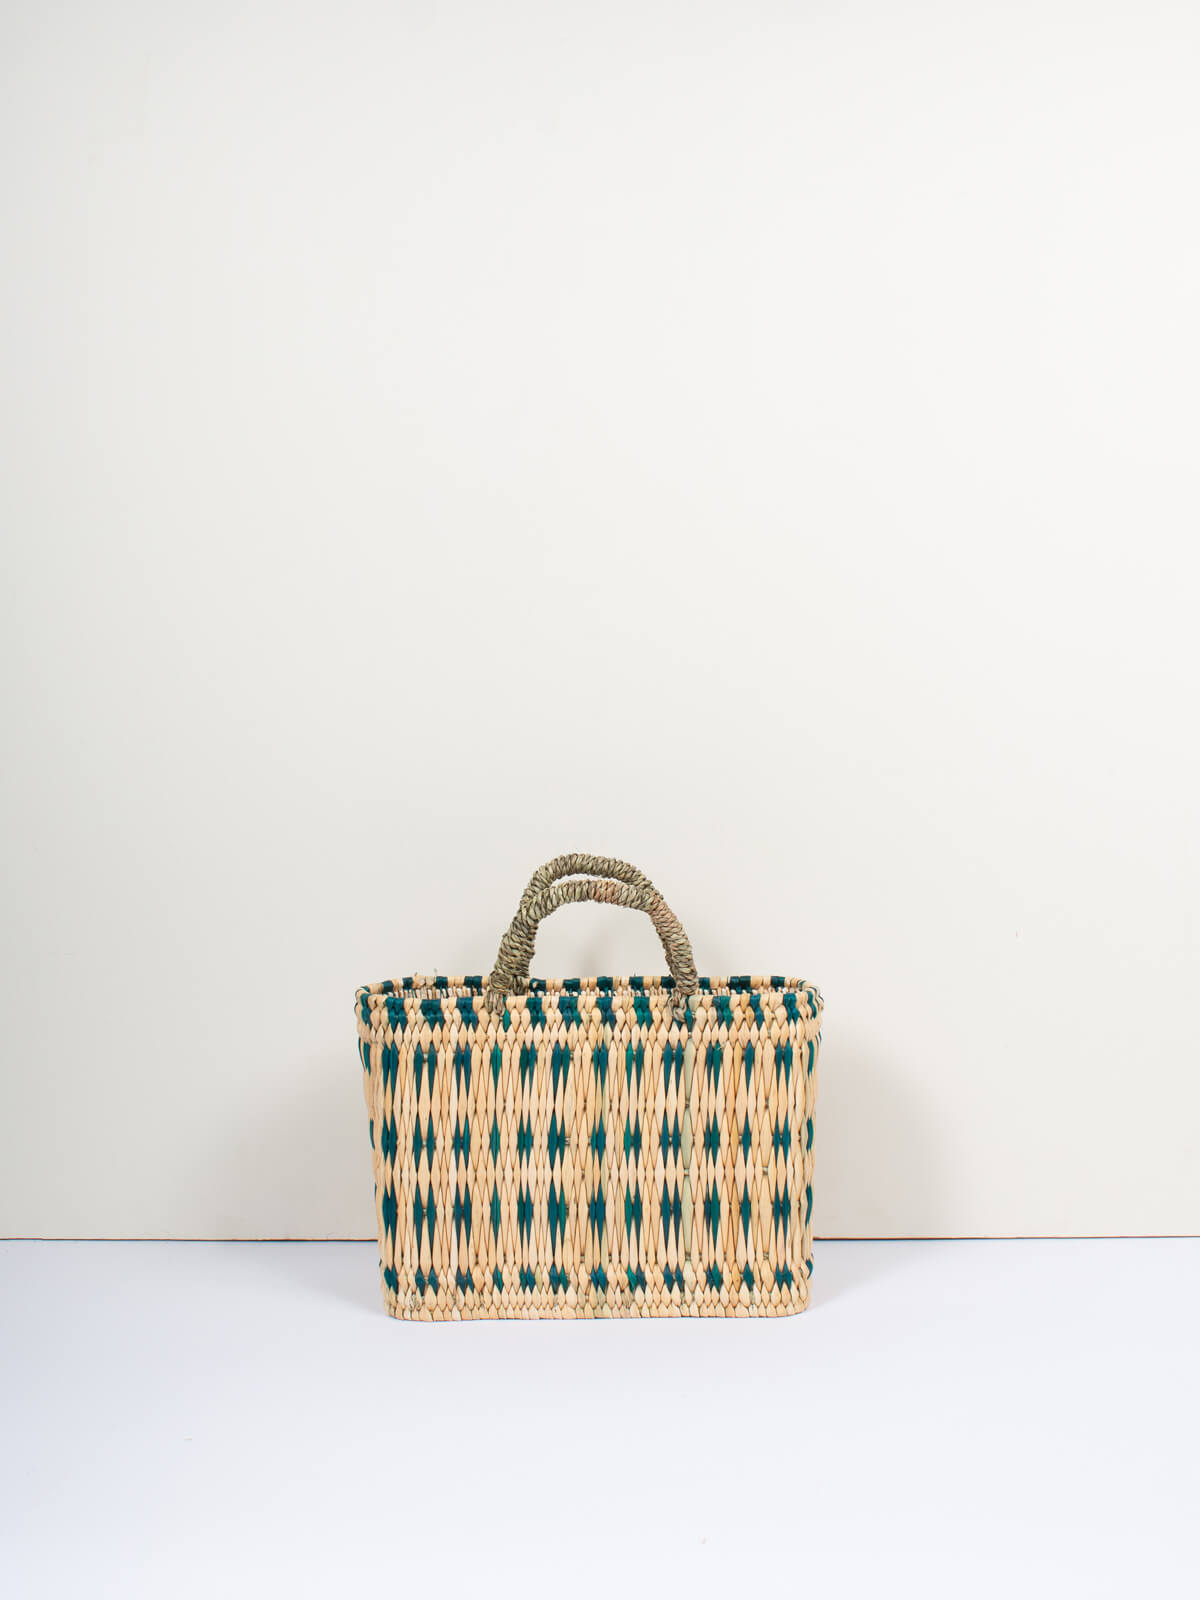 Woven Reed Basket, Green